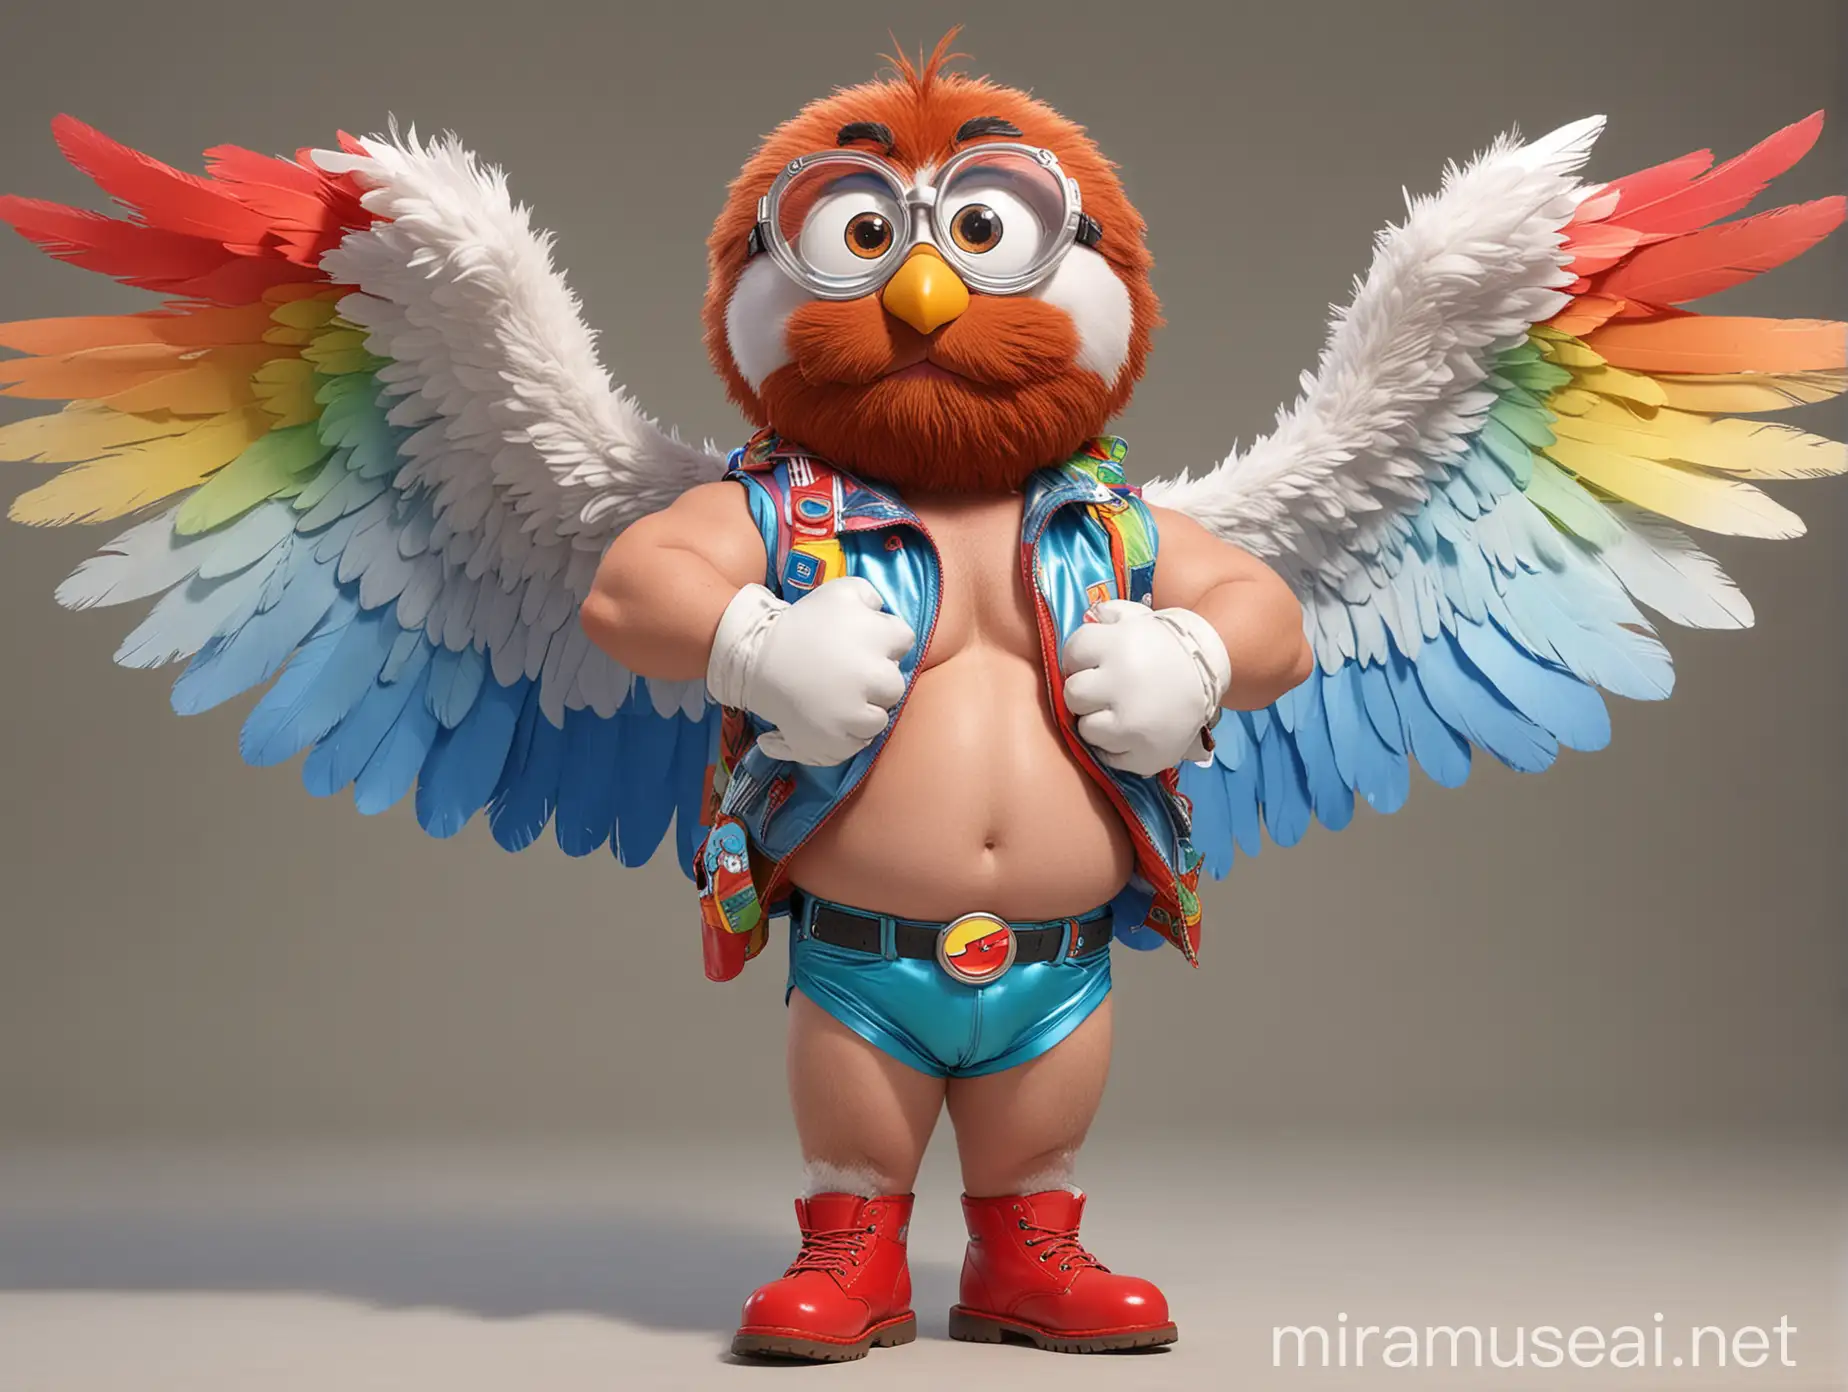 Beefy Red Head Bodybuilder Daddy Flexing with RainbowColored Eagle Wings Jacket